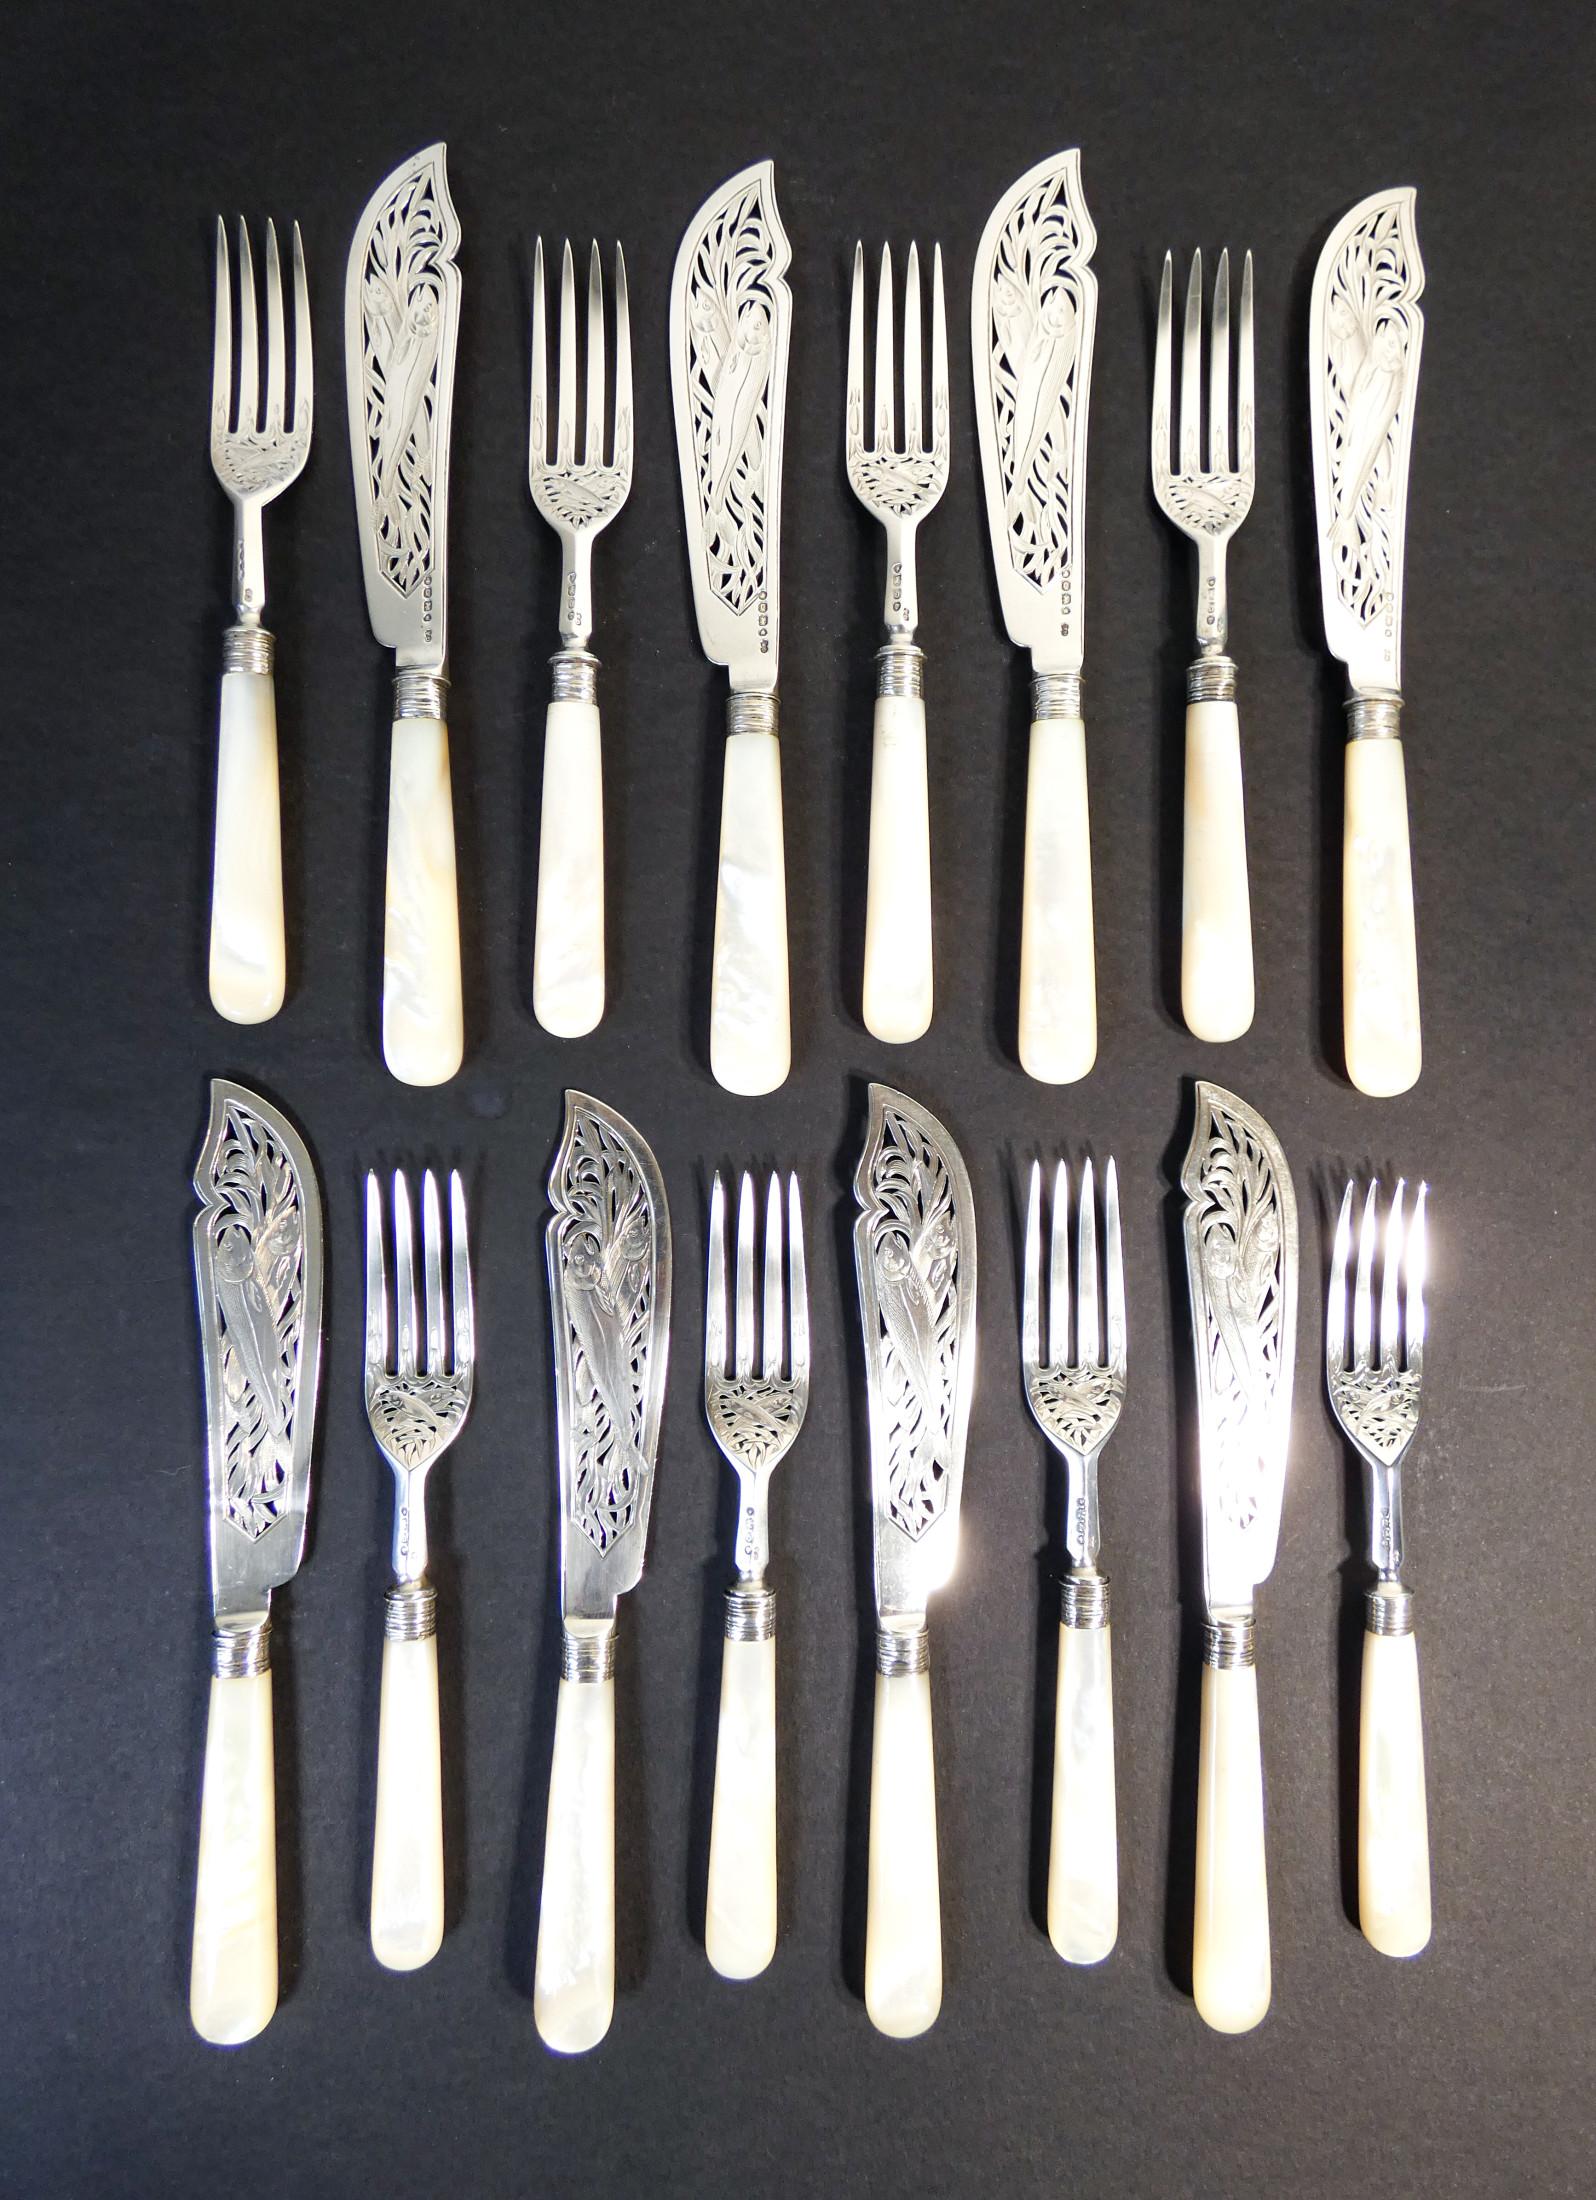 Fish set for eight in sterling silver, mother of pearl handles.
CHAWNER & Co. George William Adams.
London England, 1857-59

Measures: Forks L 19.5 cm
Knives L 23 cm.